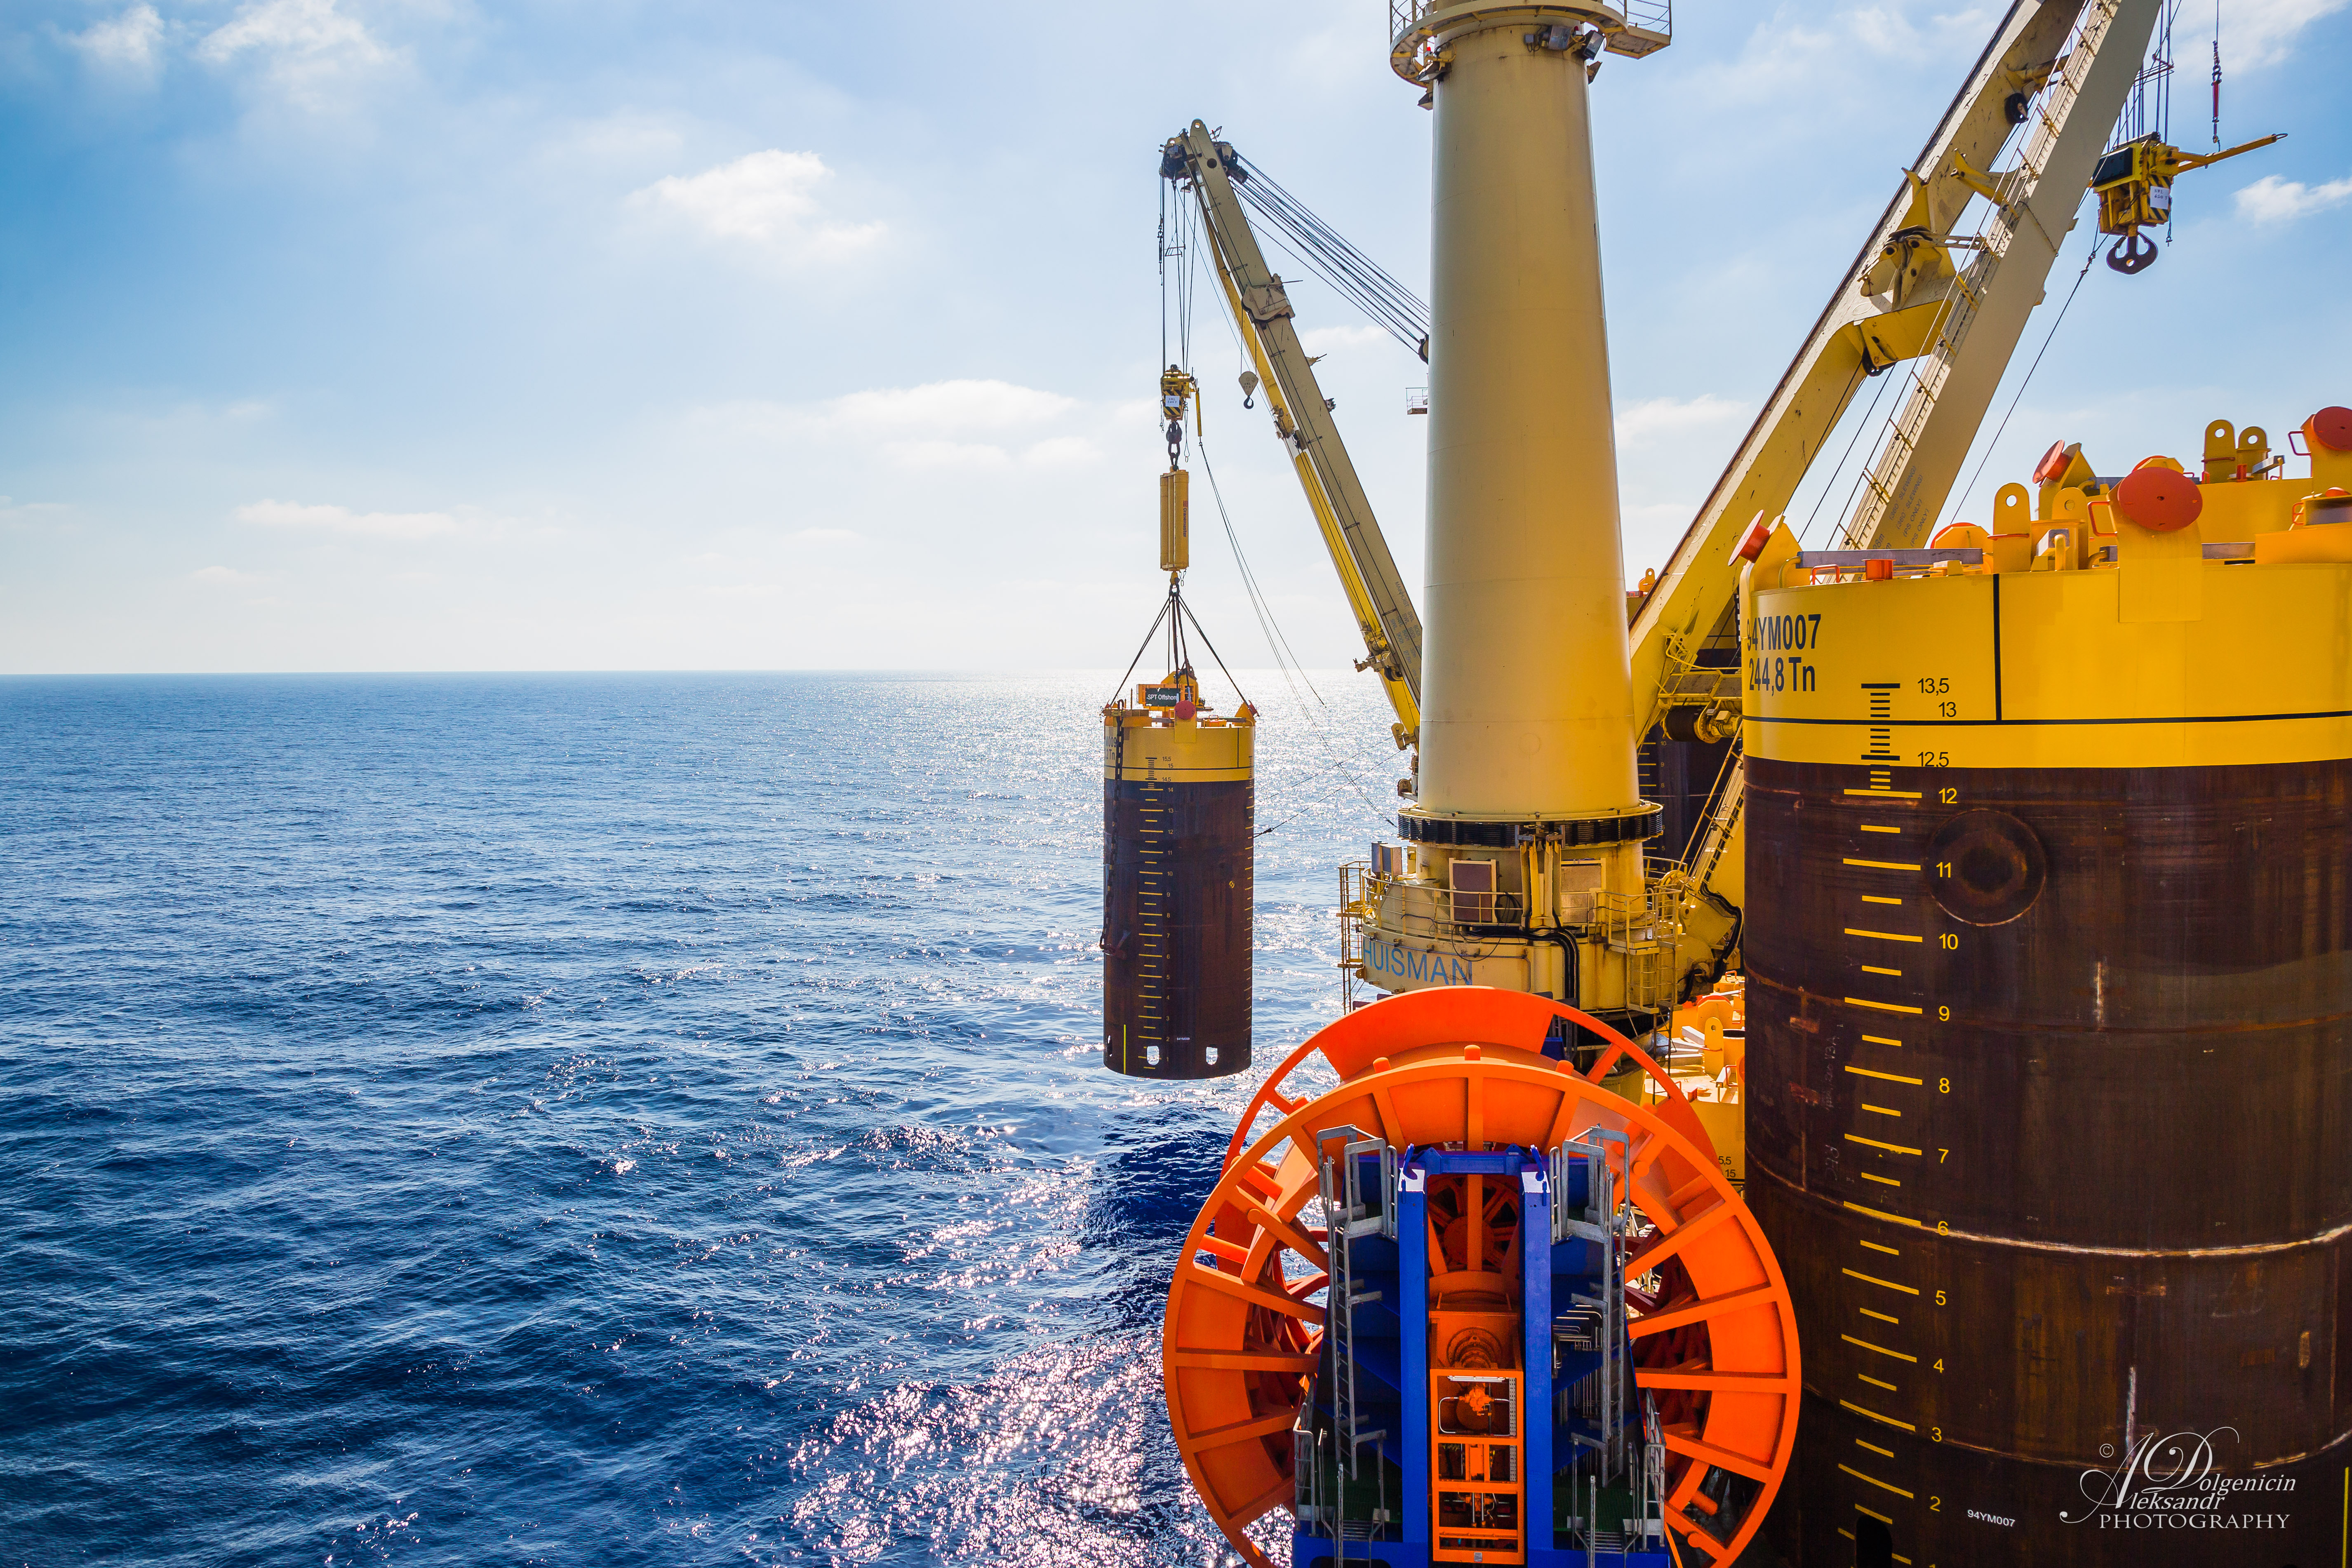 Jumbo installs Karish FPSO mooring system while breaking its deep-water record in the process